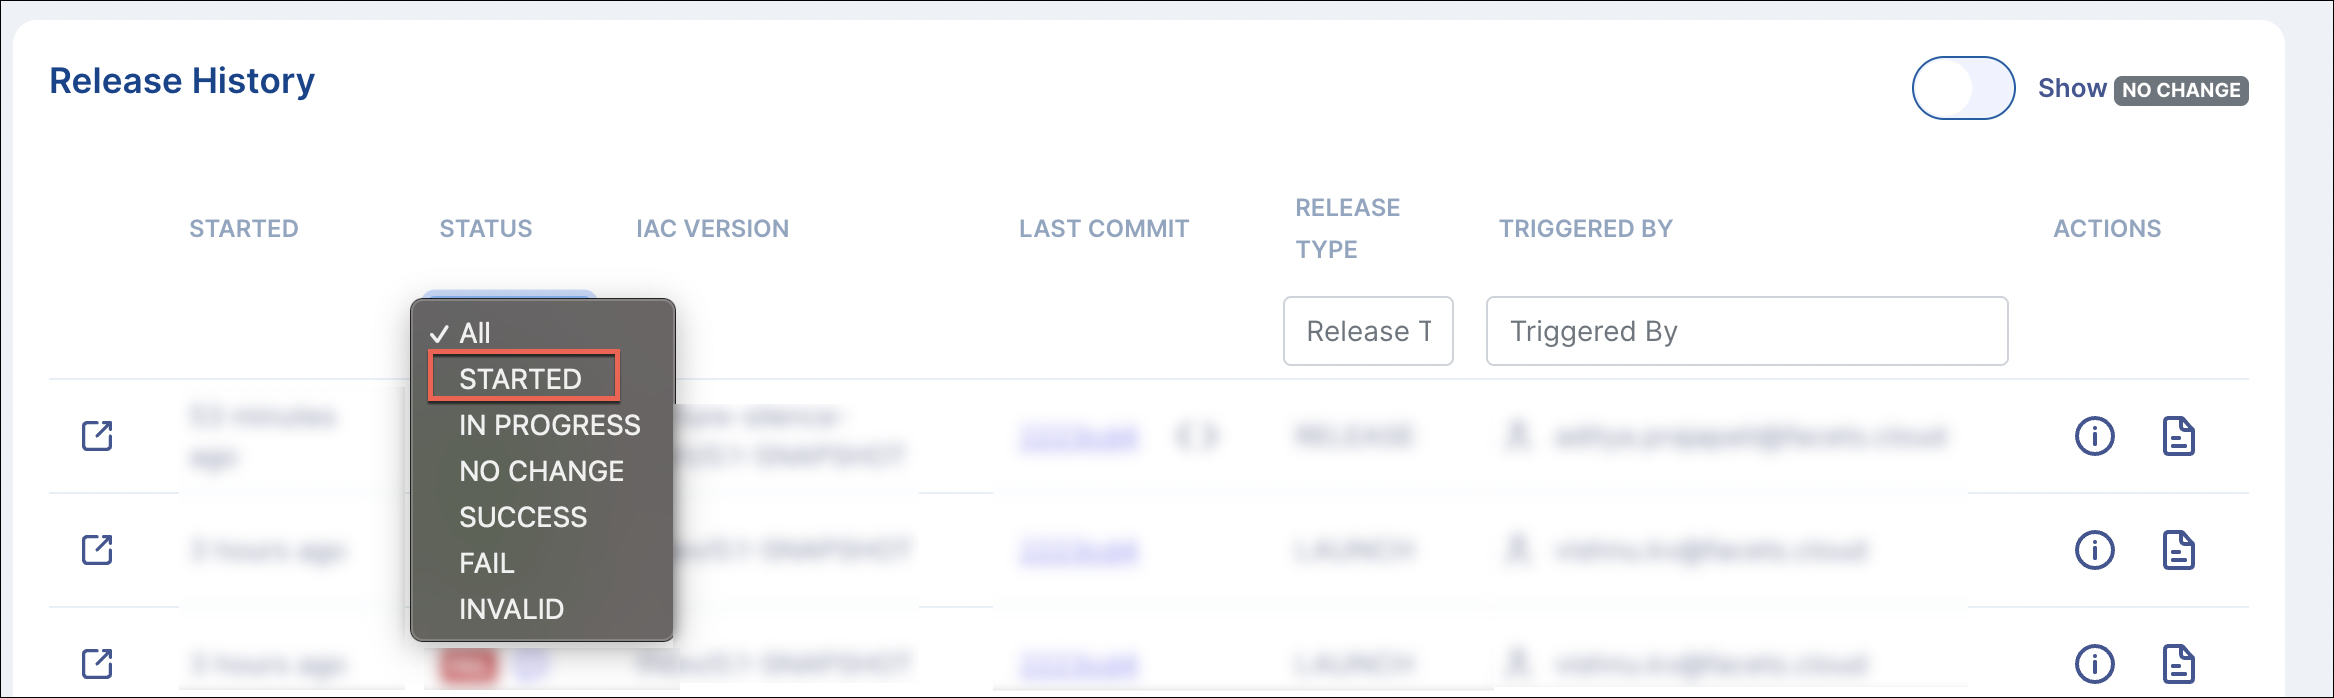 `STARTED` Release Status